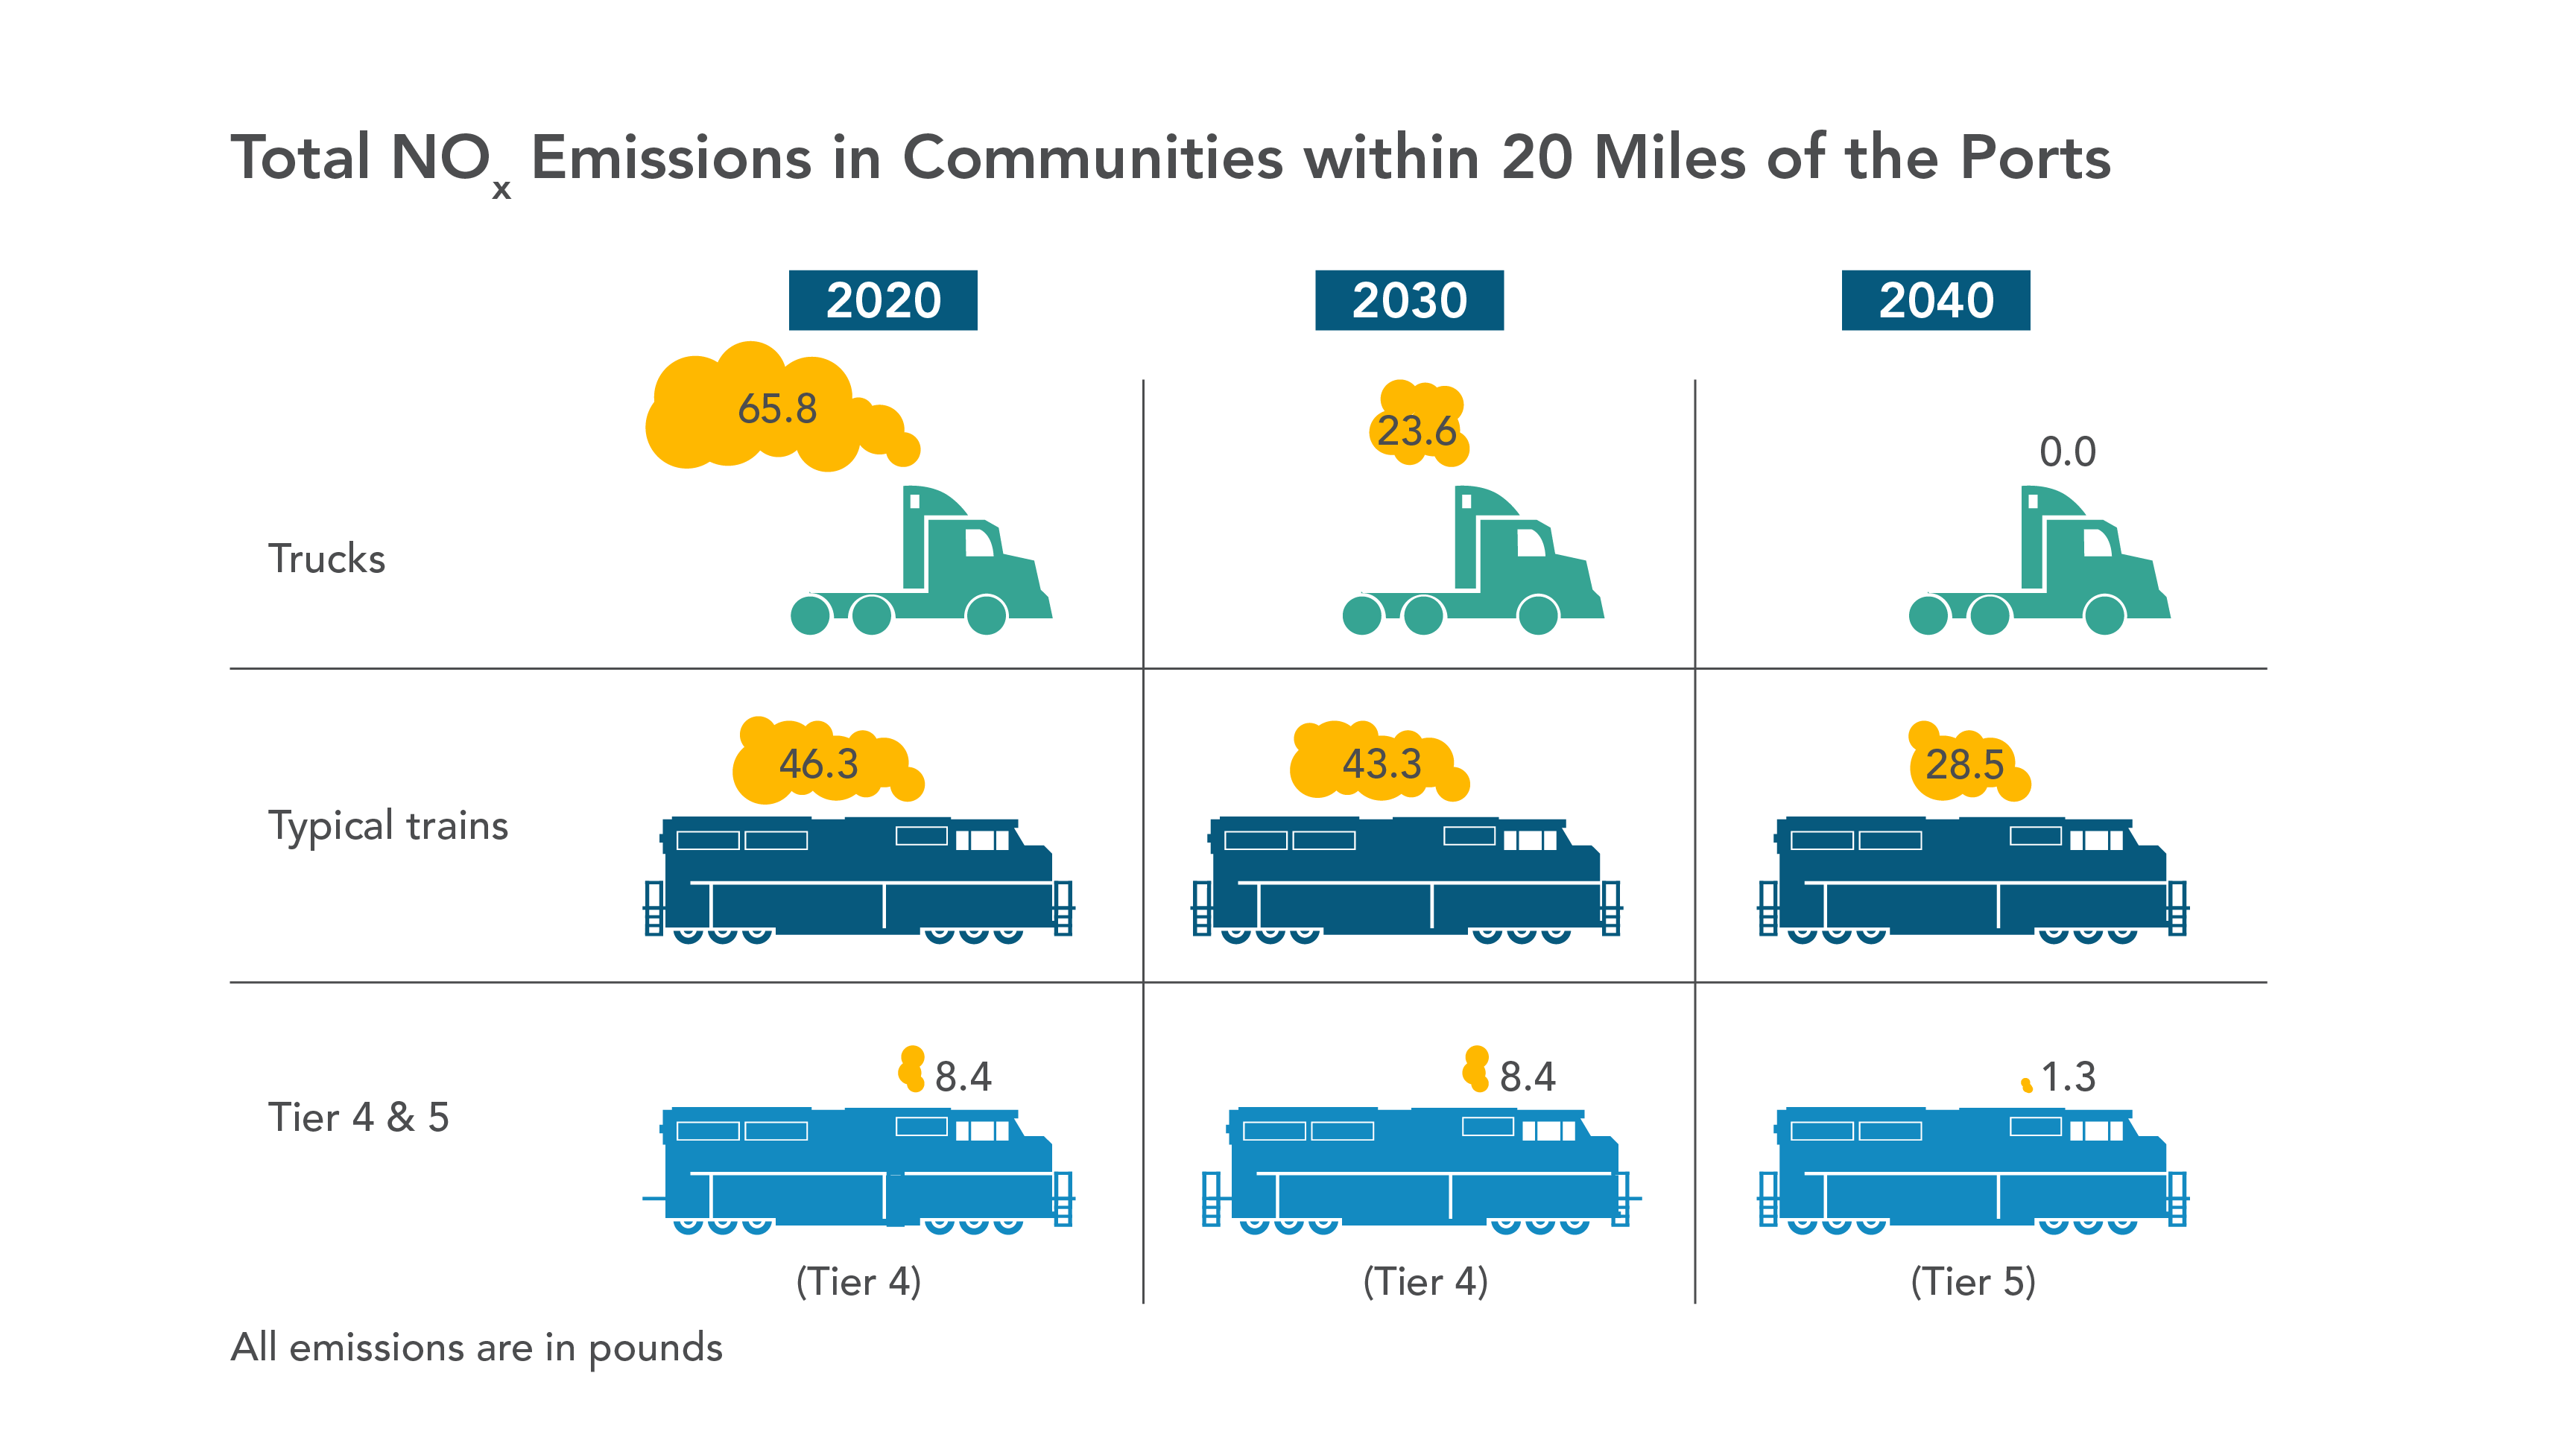 Comparison of truck and train Nox emissions in communities within 20 miles of the ports.  Includes tier 4 and 5 locomotives, which are cleaner than trucks in 2020 and 2030.